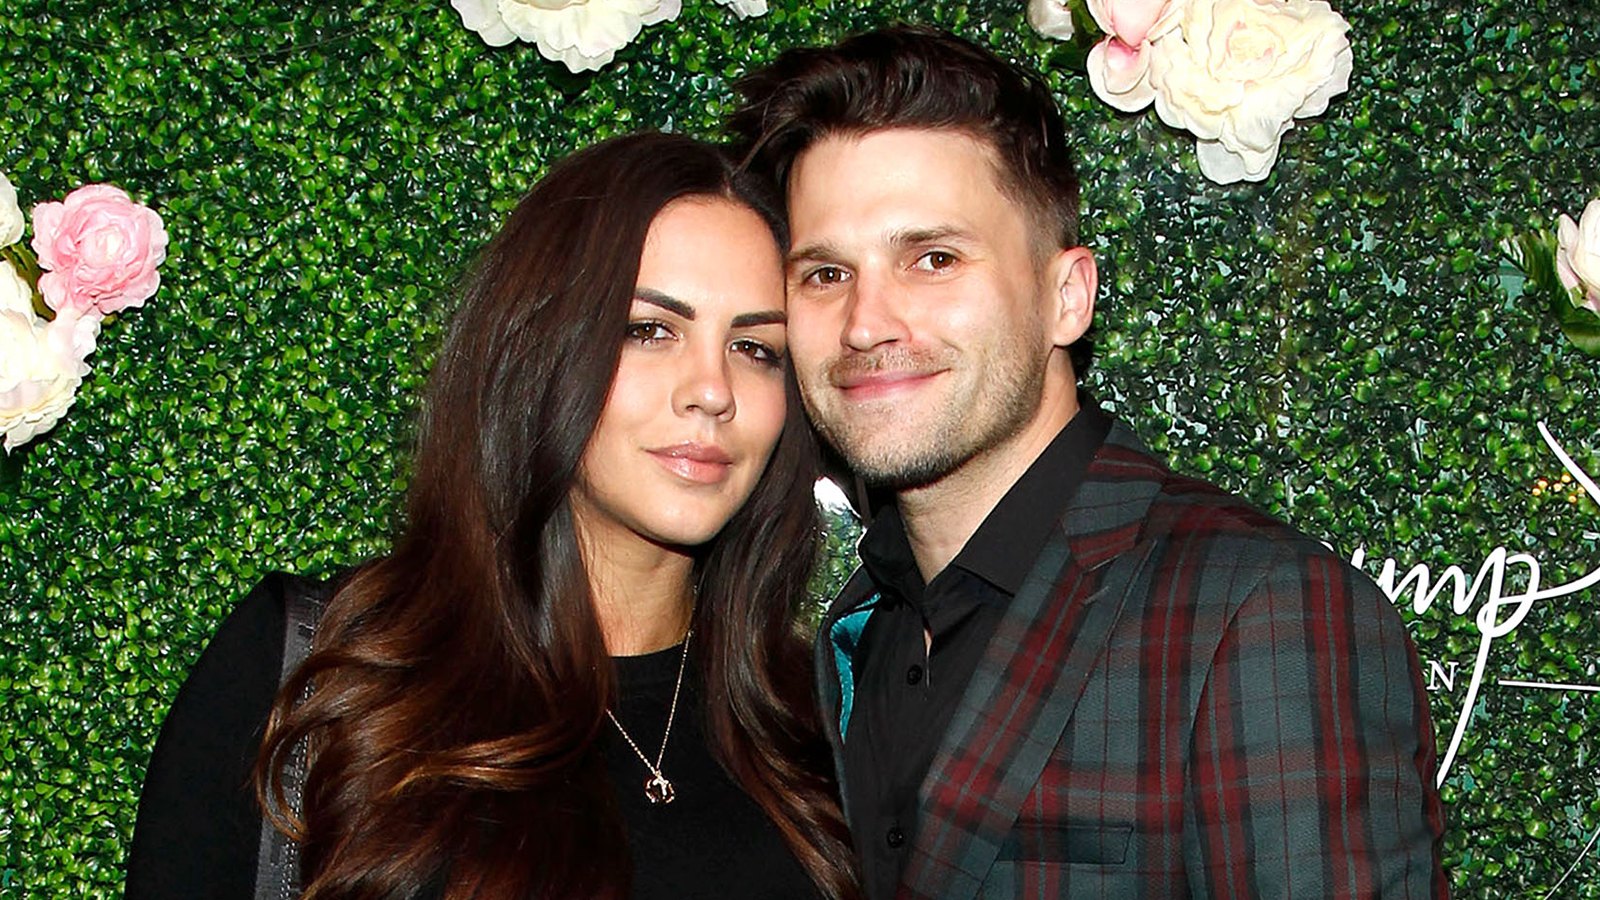 Vanderpump Rules' Tom Schwartz and Katie Maloney Hang Out After Split: ‘It’s All Good’